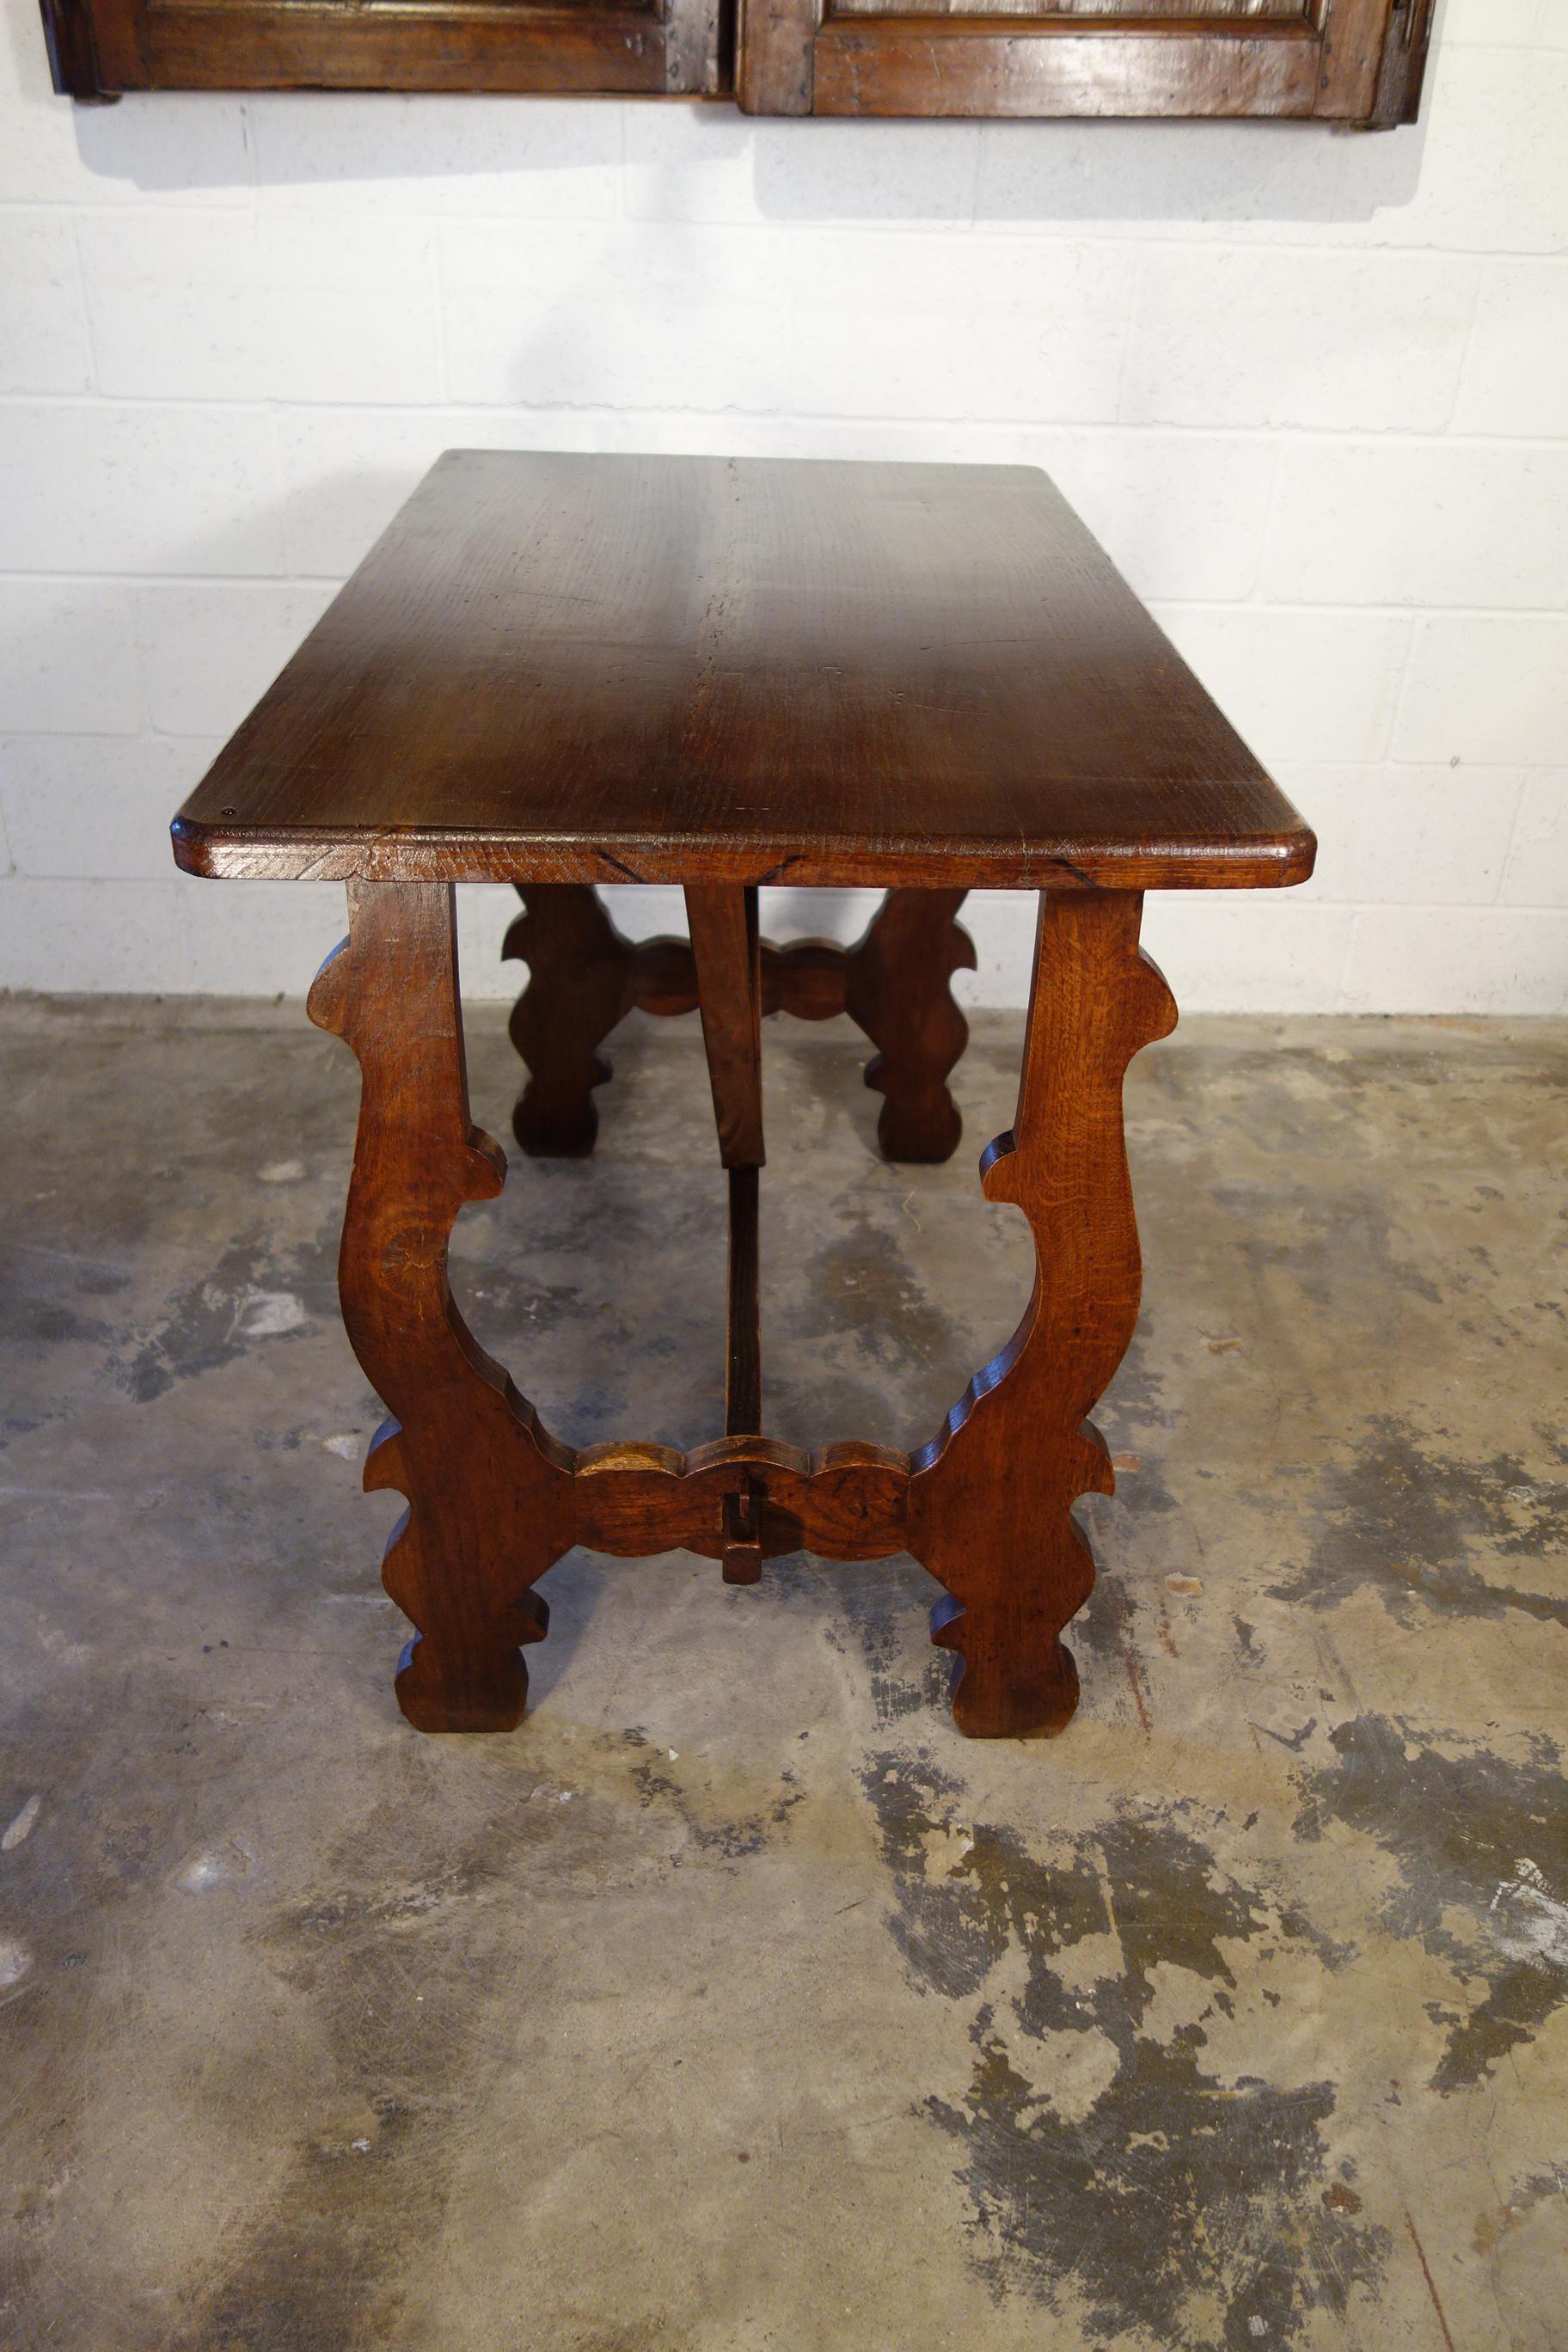 Antique Italian Tuscan Renaissance Refectory Style Hand Crafted Oak Farm Table For Sale 1